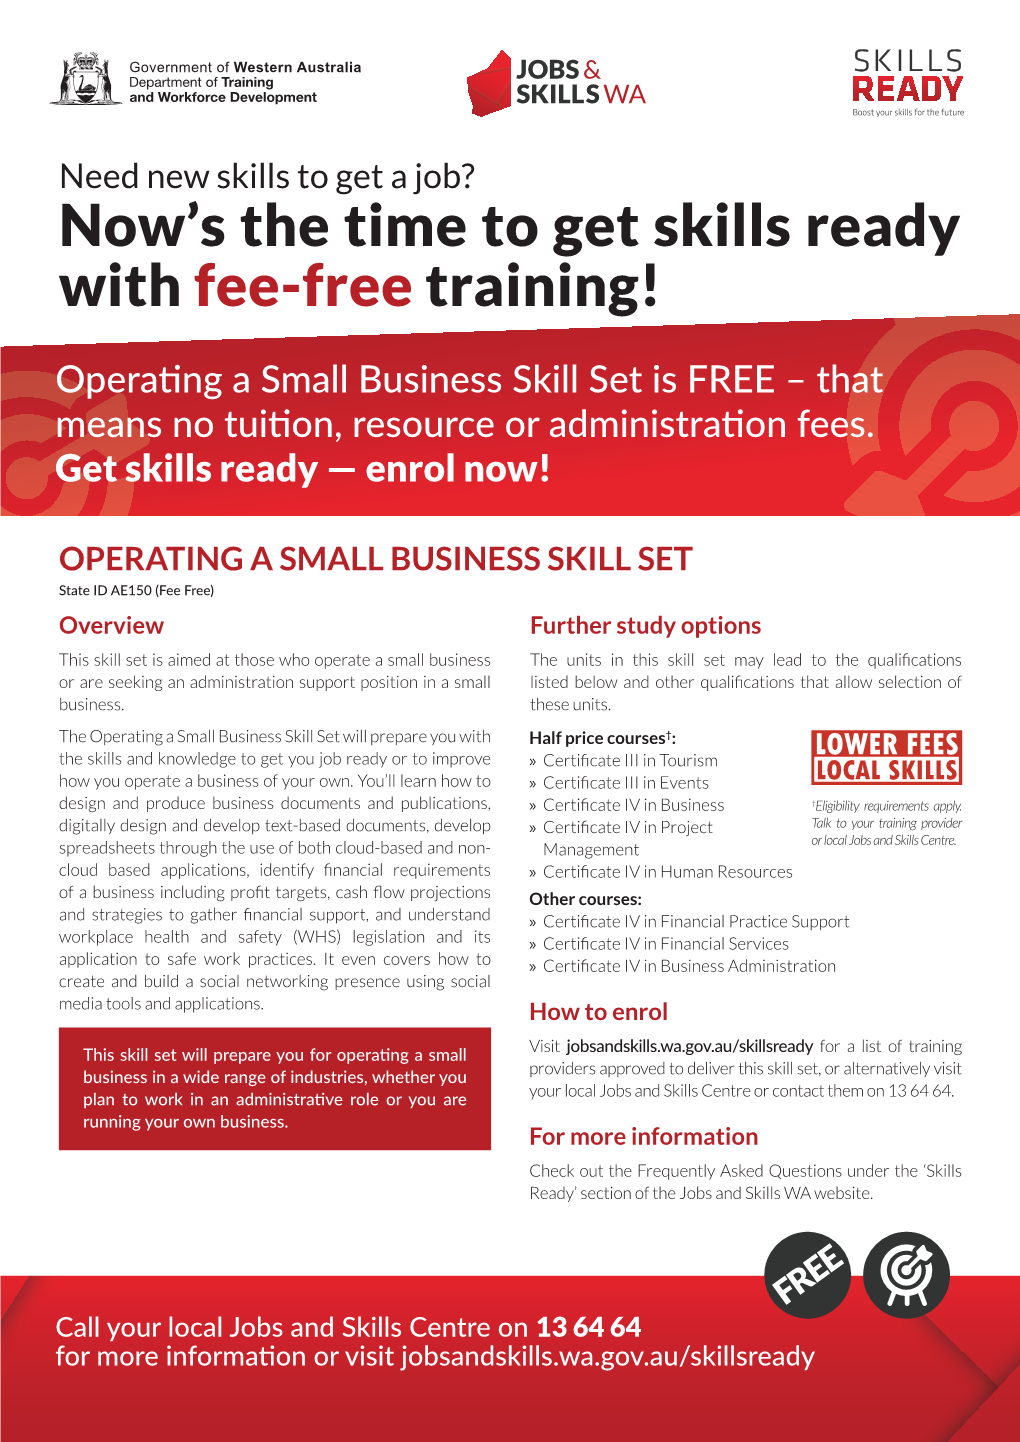 Now's the Time to Get Skills Ready with Fee-Free Training!